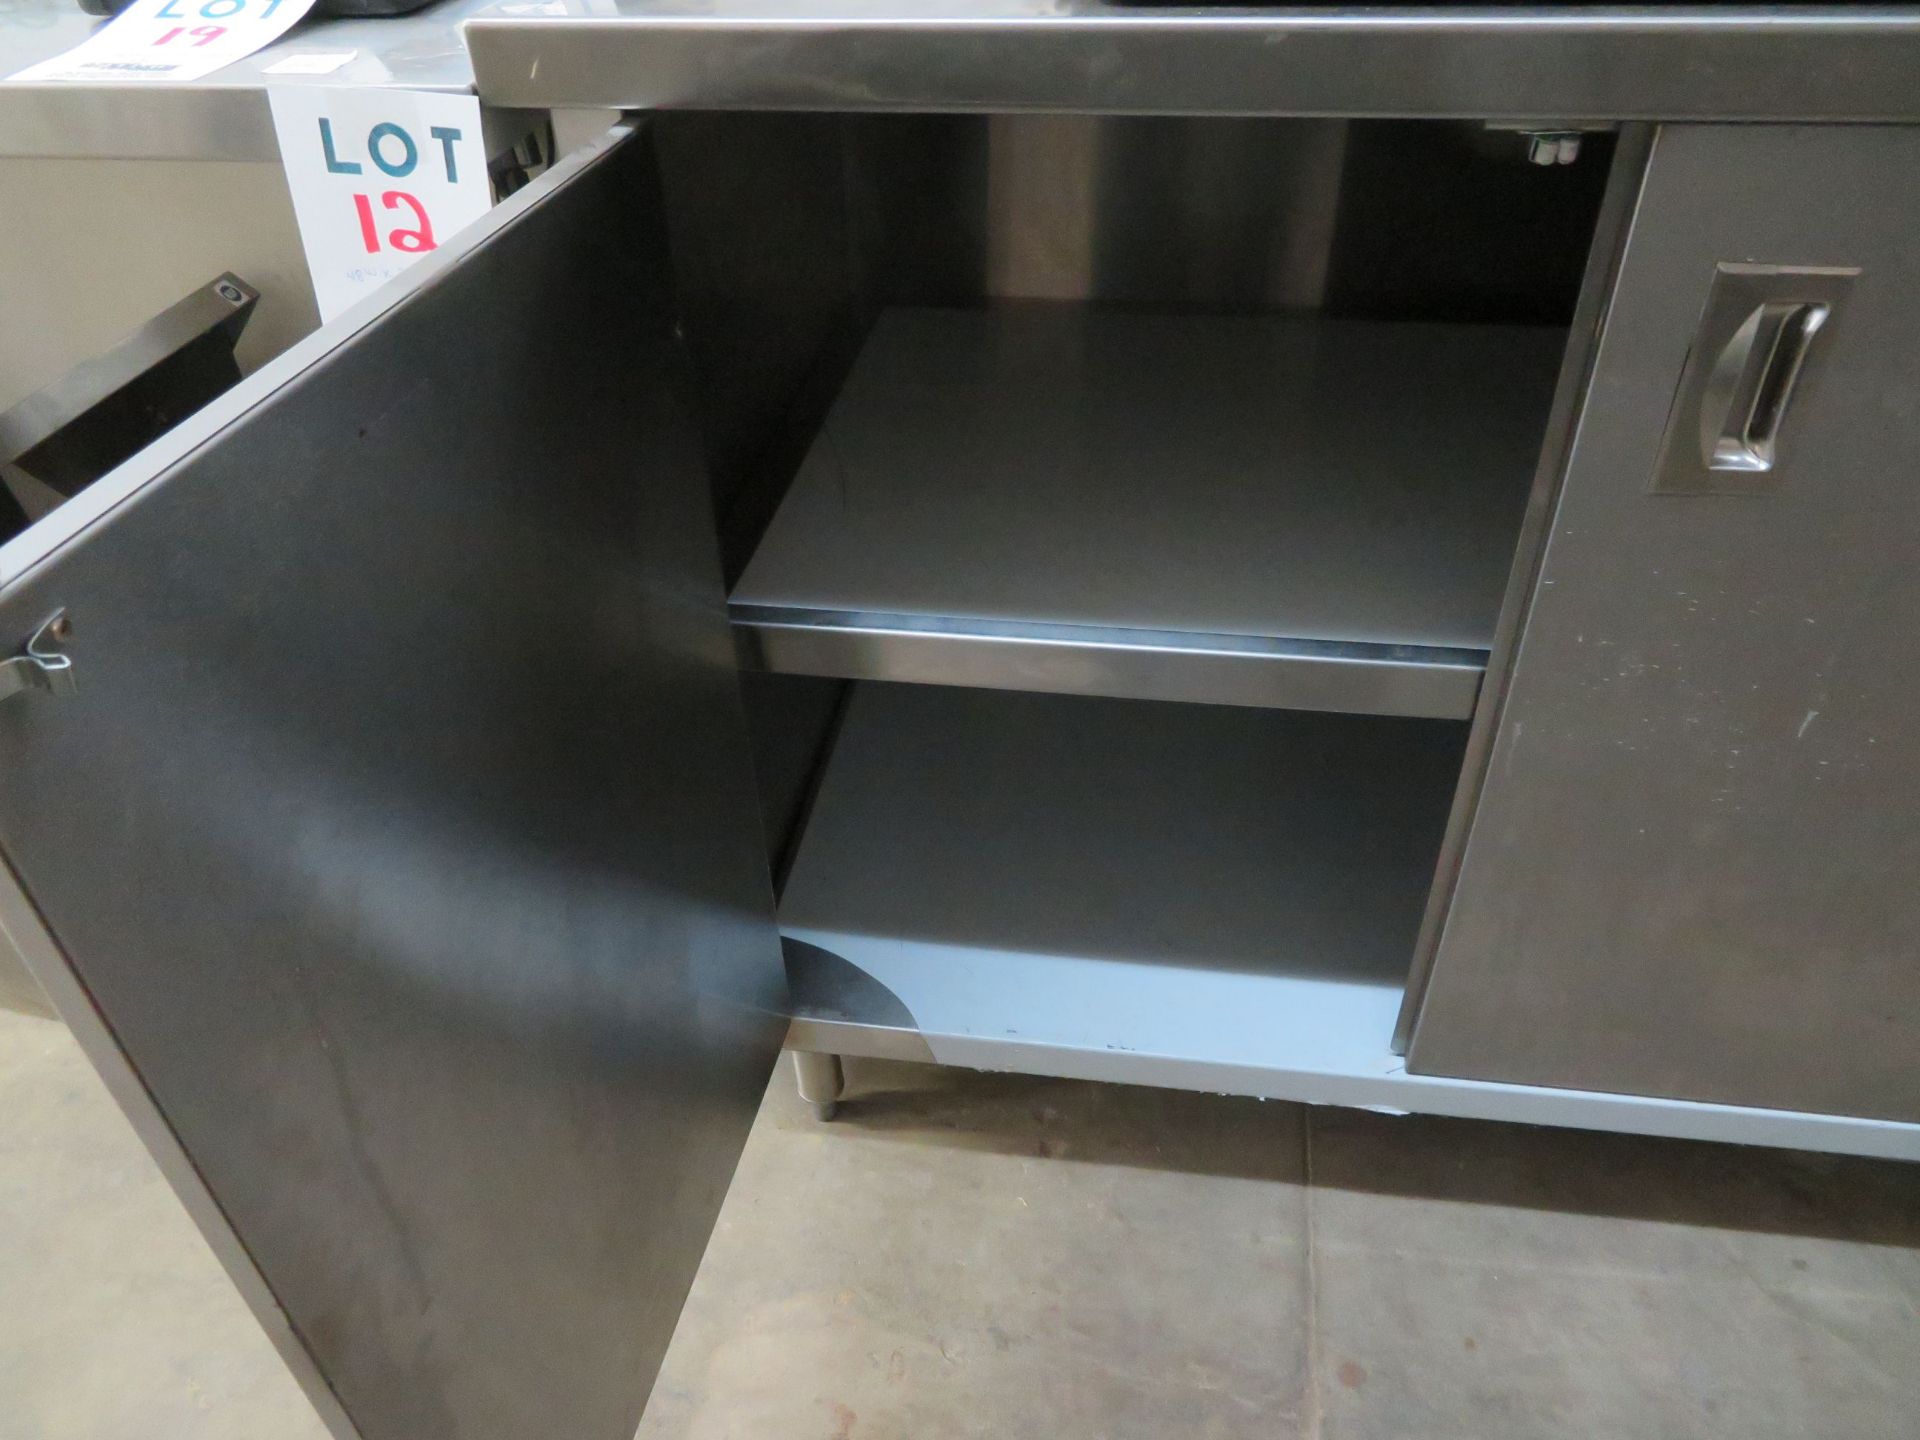 2 door stainless steel cabinet approx. 43"w x 23"d x 36"h - Image 2 of 2